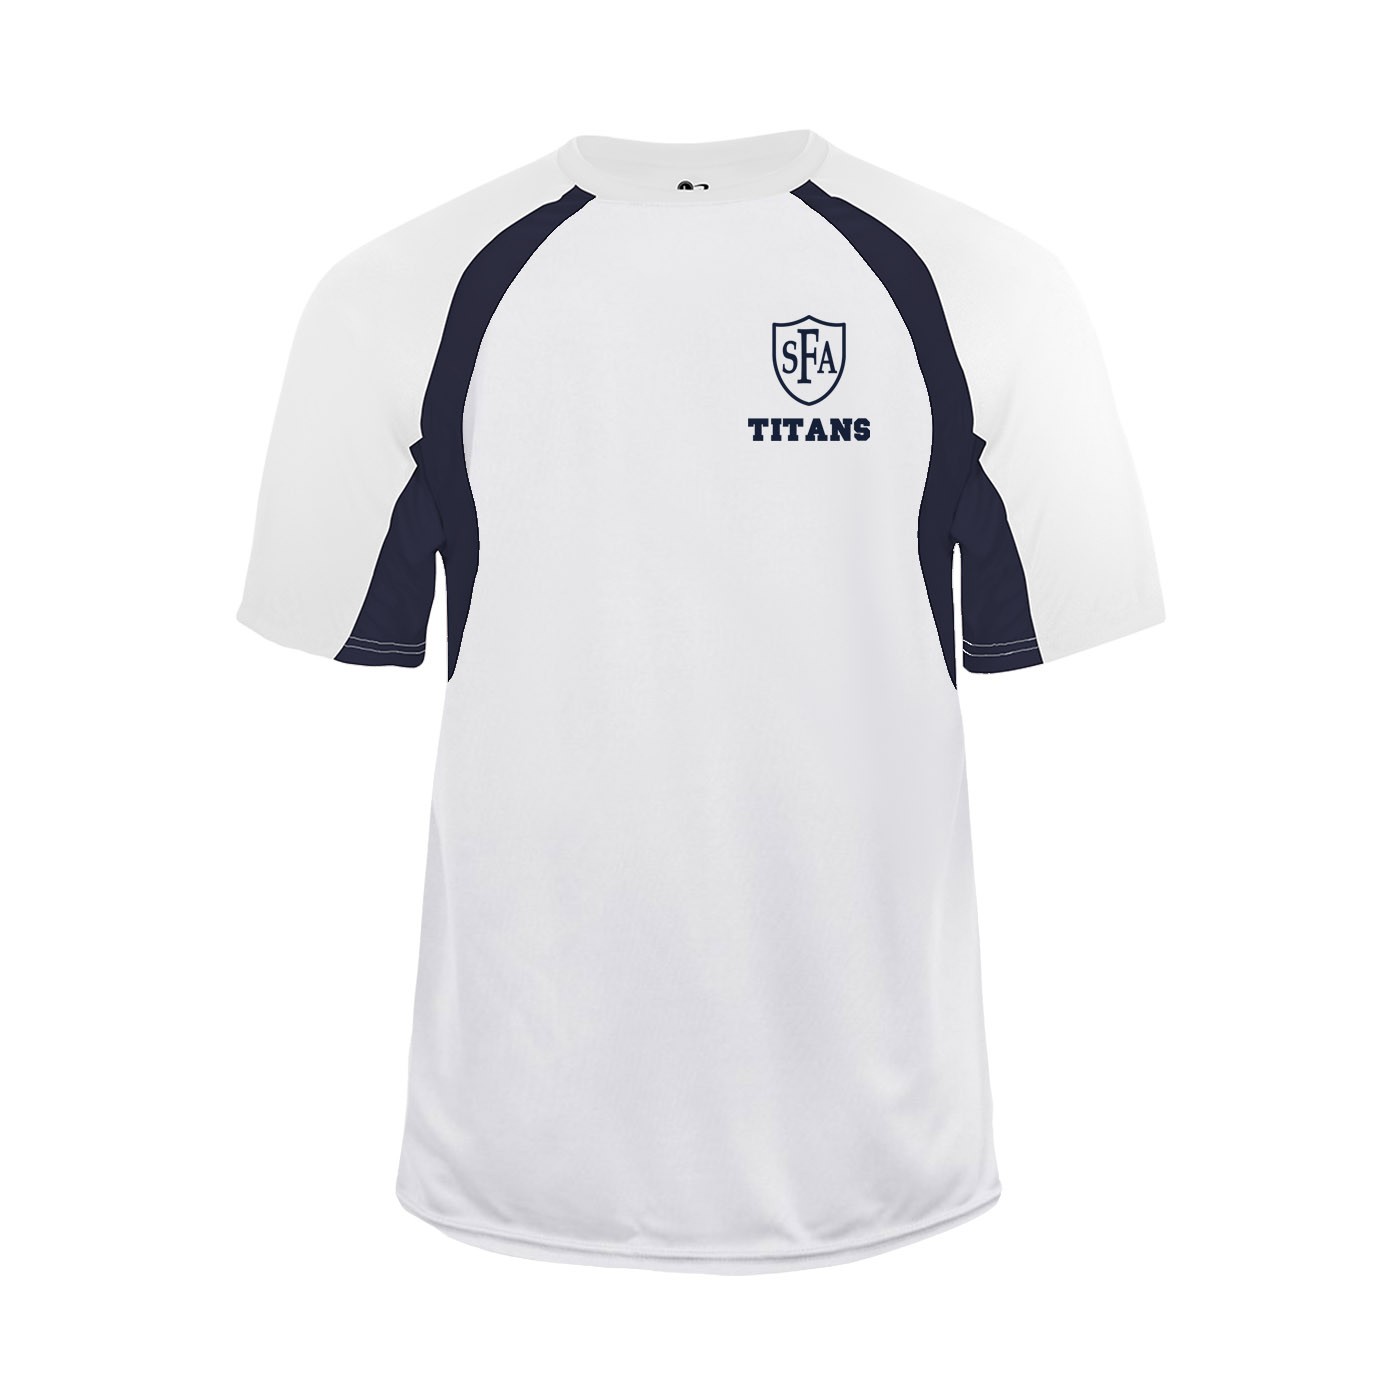 SFA Spirit Hook S/S T-Shirt w/ Titan Logo - Please Allow 2-3 Weeks for Delivery